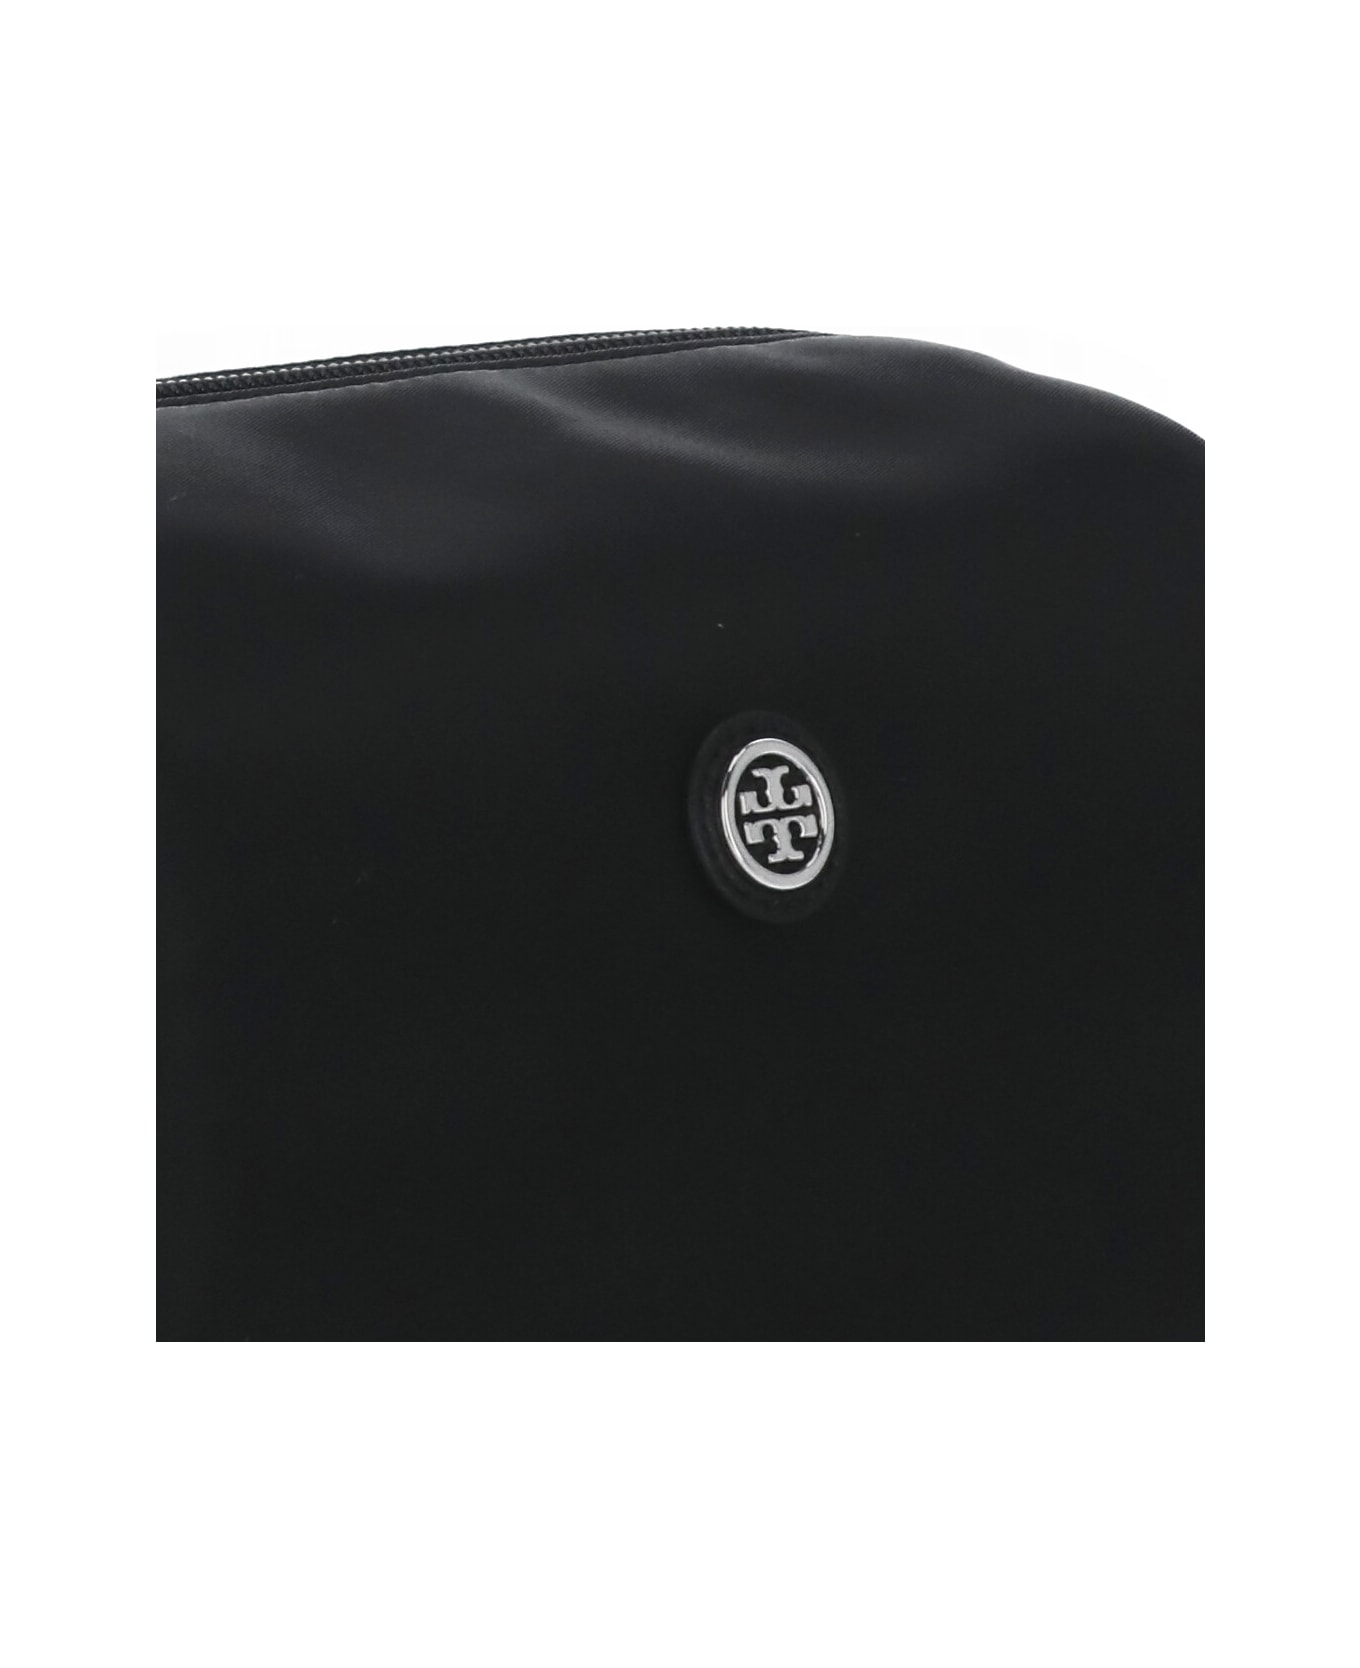 Tory Burch Logo Plaque Large Cosmetic Bag - Black クラッチバッグ